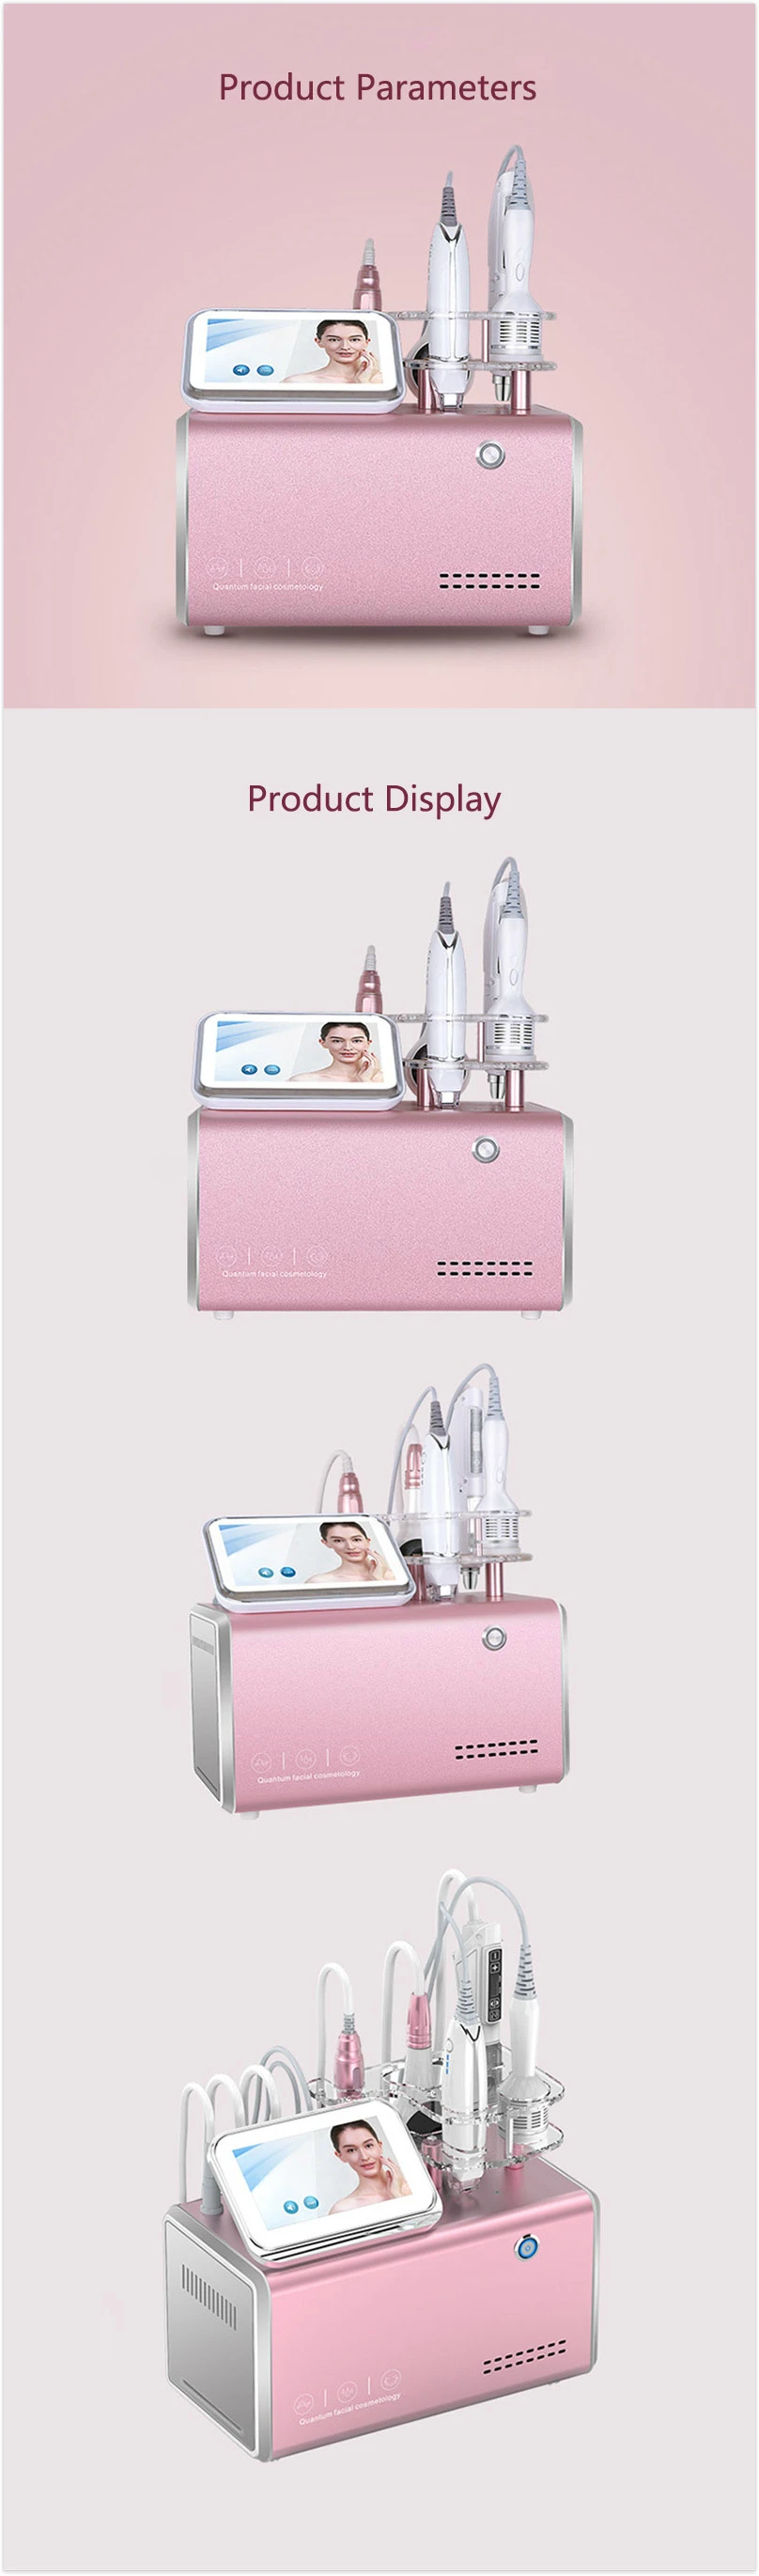 5 IN 1 Facial Care Vacuum Cooling Face Lift Machine EMS Skin Tightening Skin Care Machine RF Bionic Clip Wrinkle Removal Machine